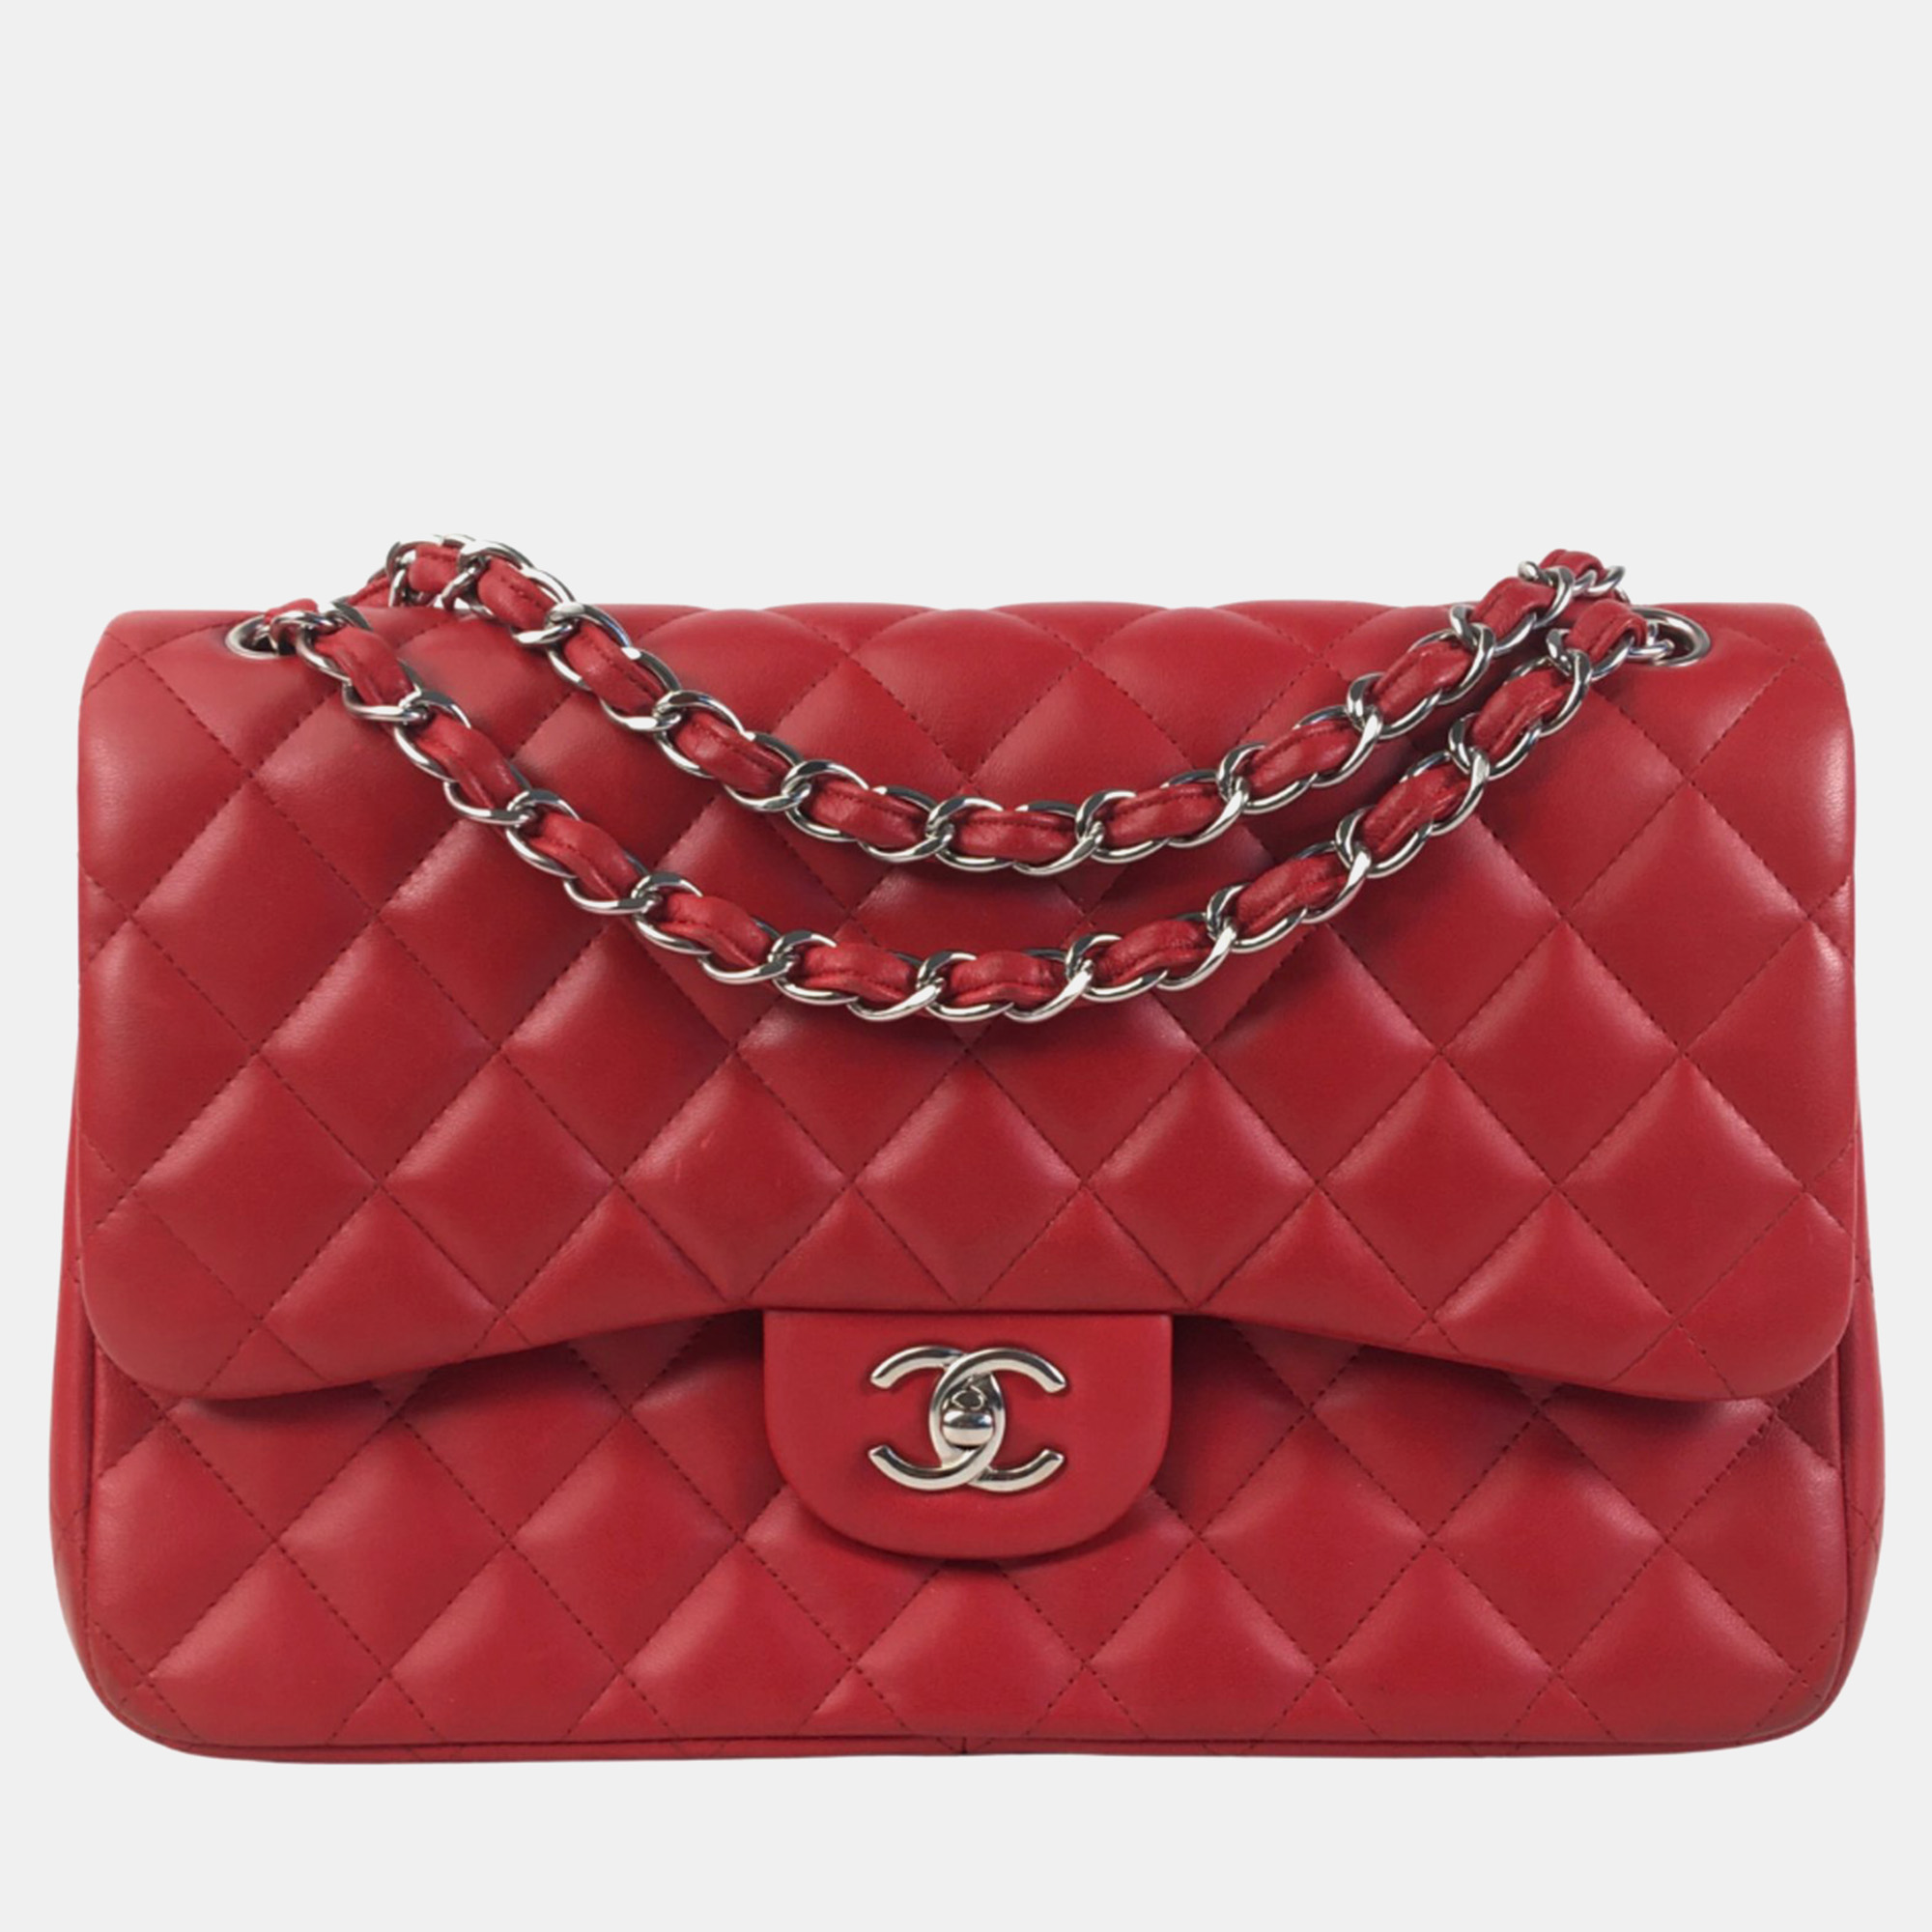 Chanel red lambskin leather jumbo classic double flap shoulder bags